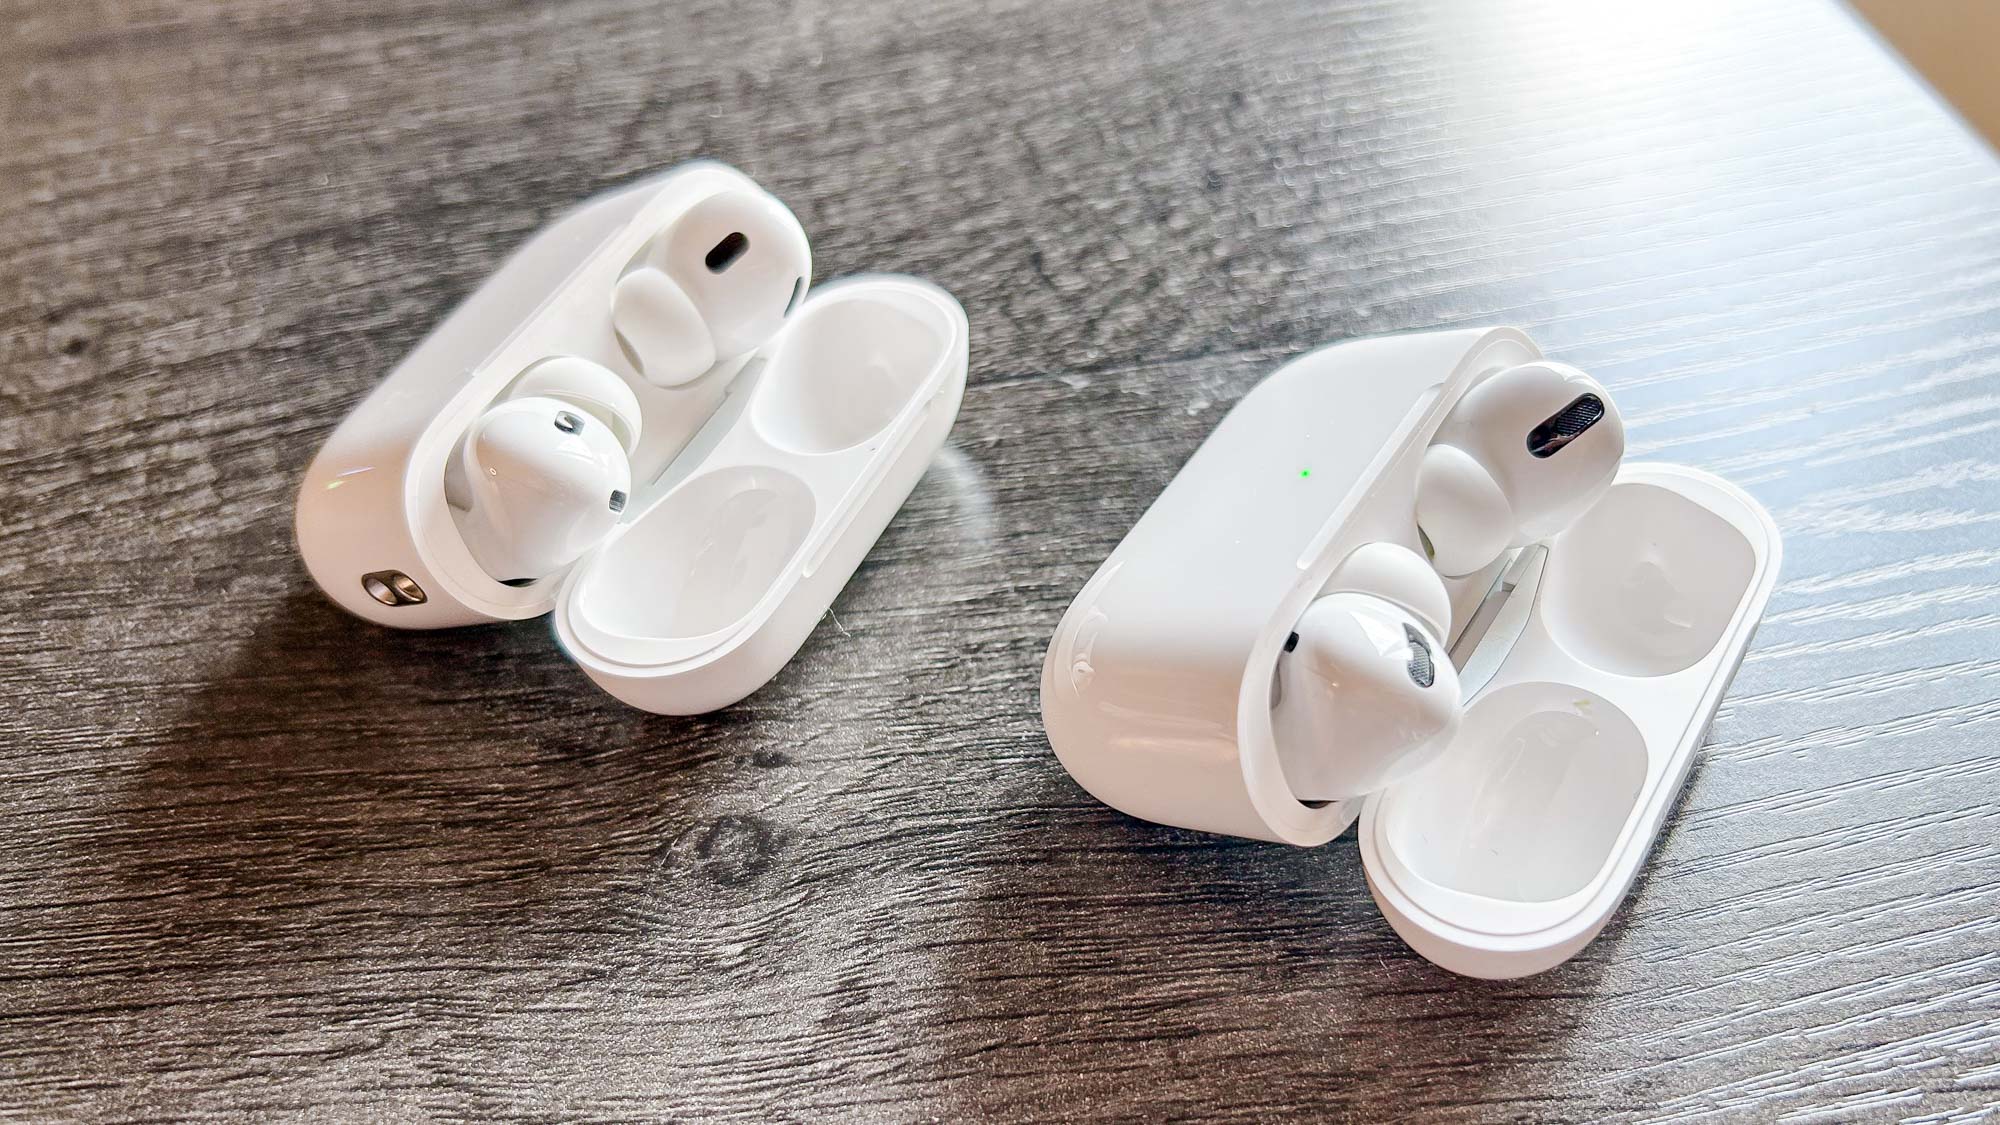 AirPods Pro (2nd Generation) shown next to the previous AirPods Pro (right)